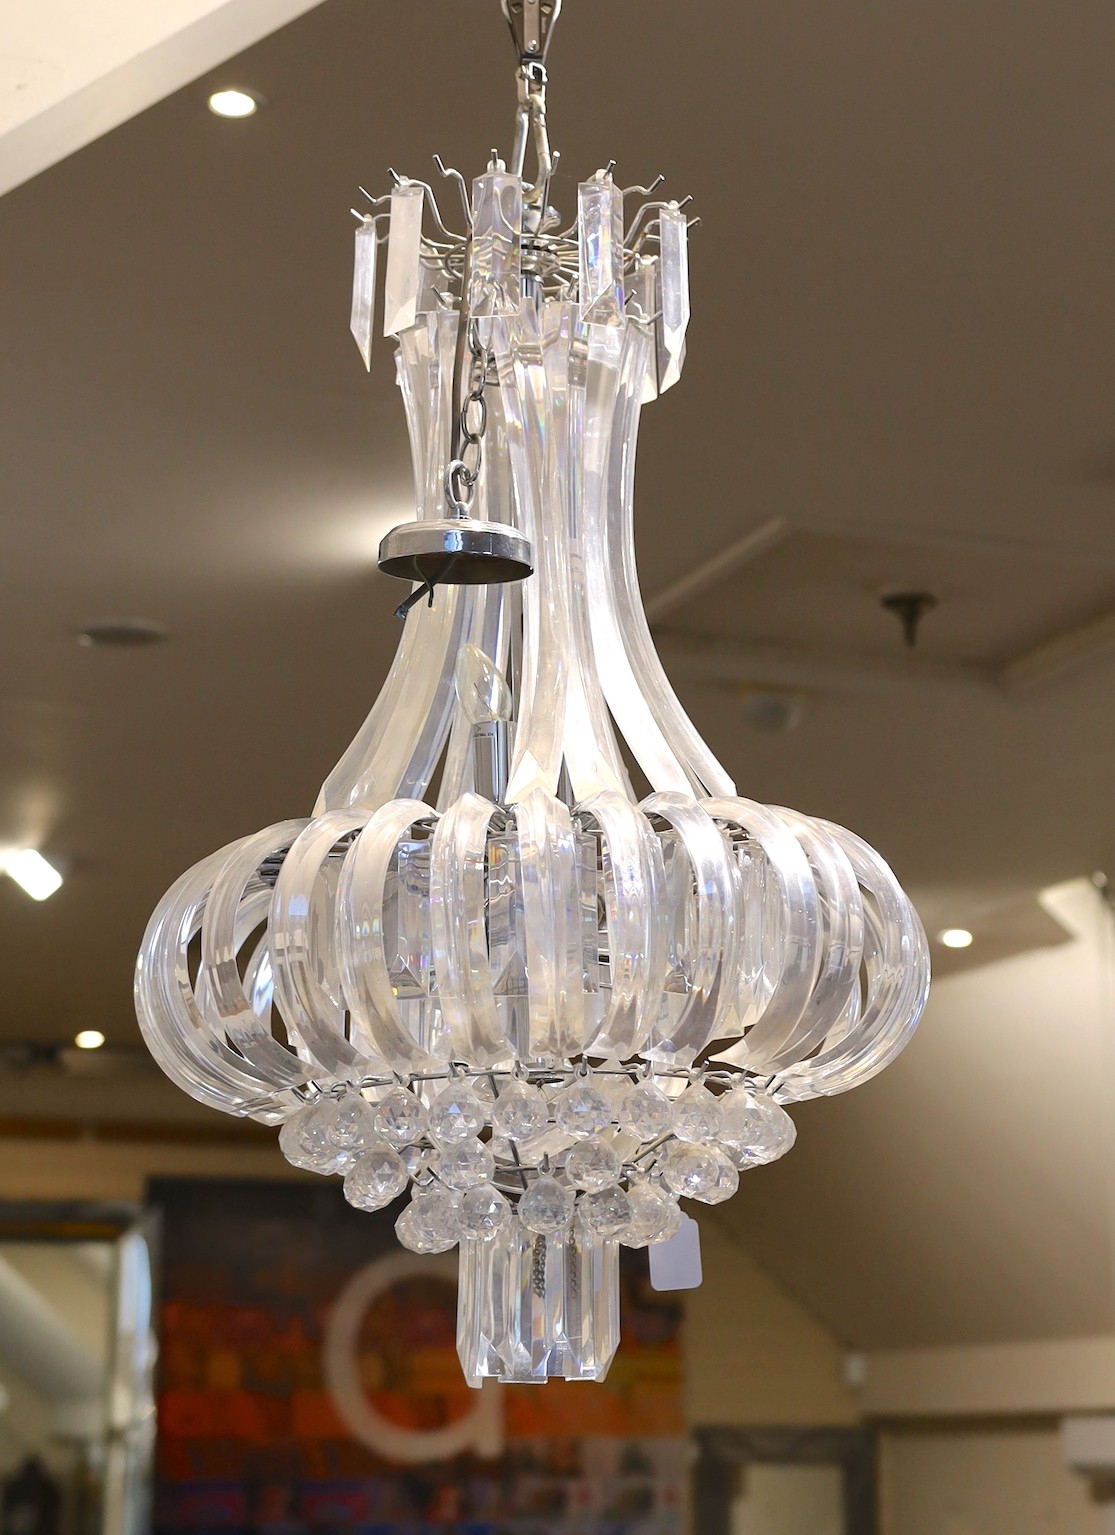 A pair of contemporary perspex chandeliers